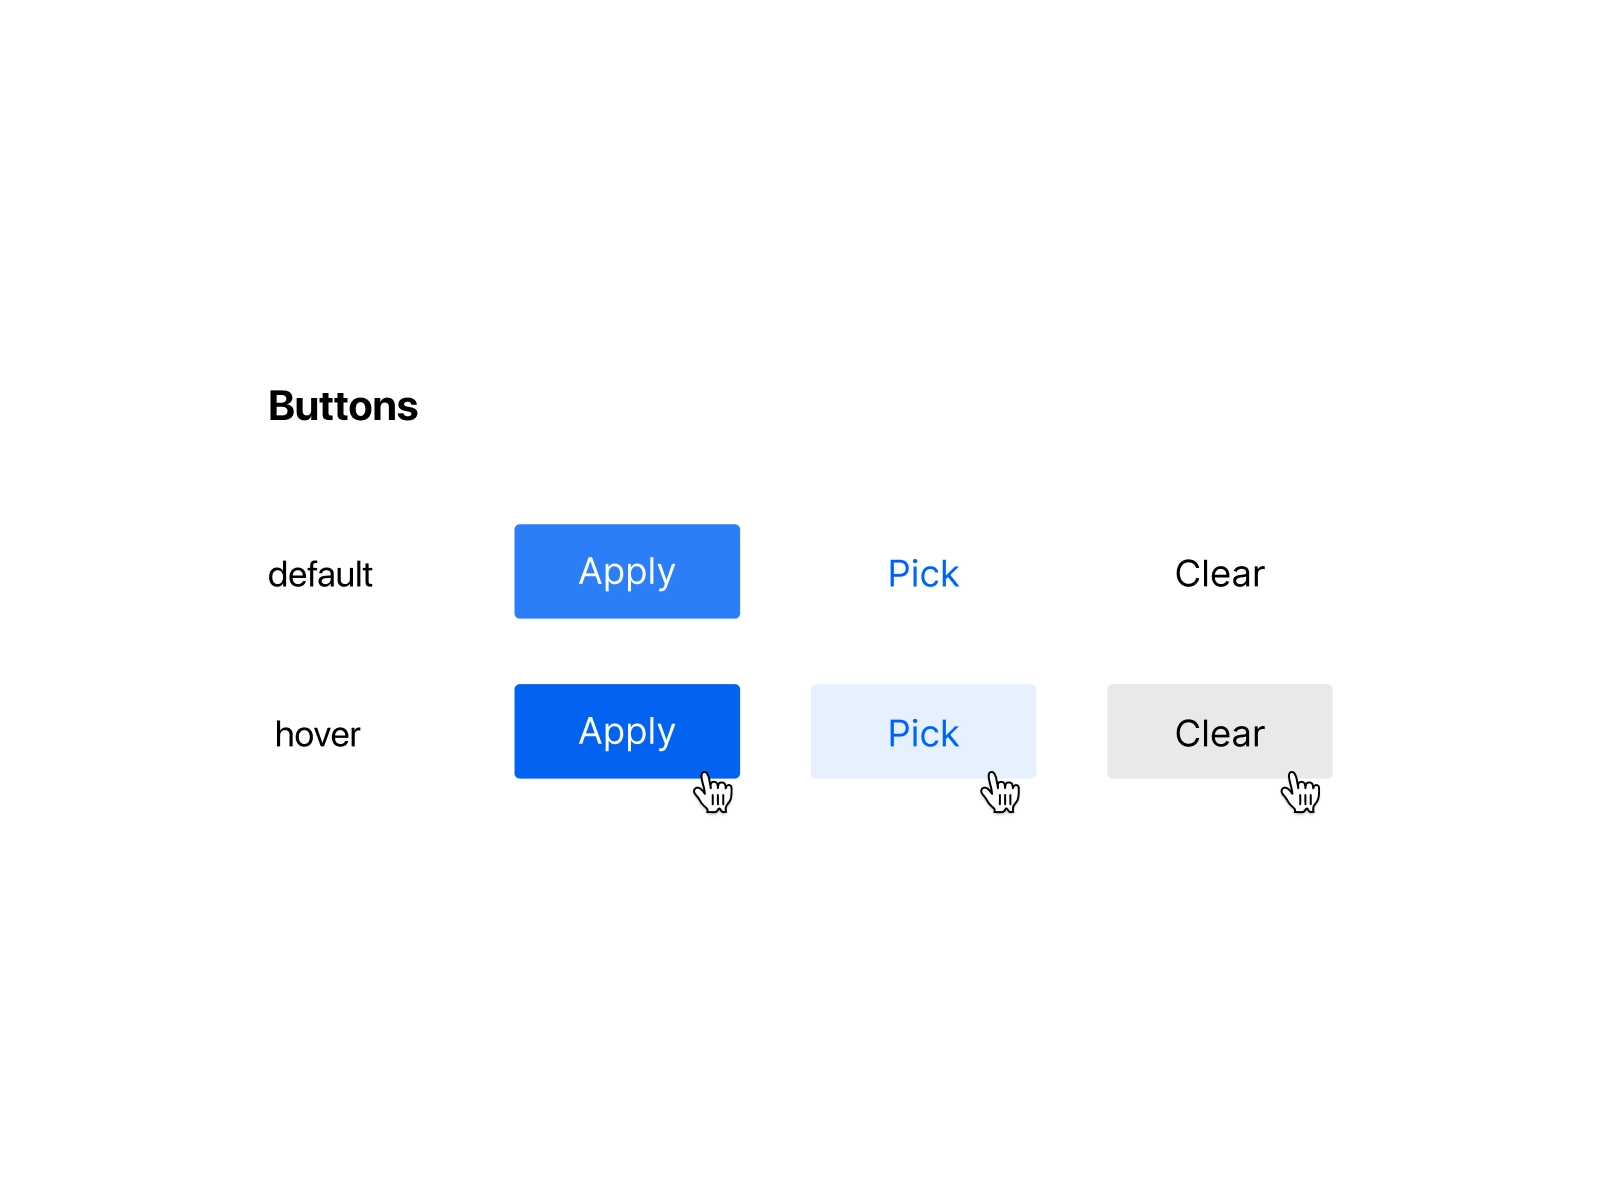 Buttons made simple by Tetiana Sydorenko on Dribbble